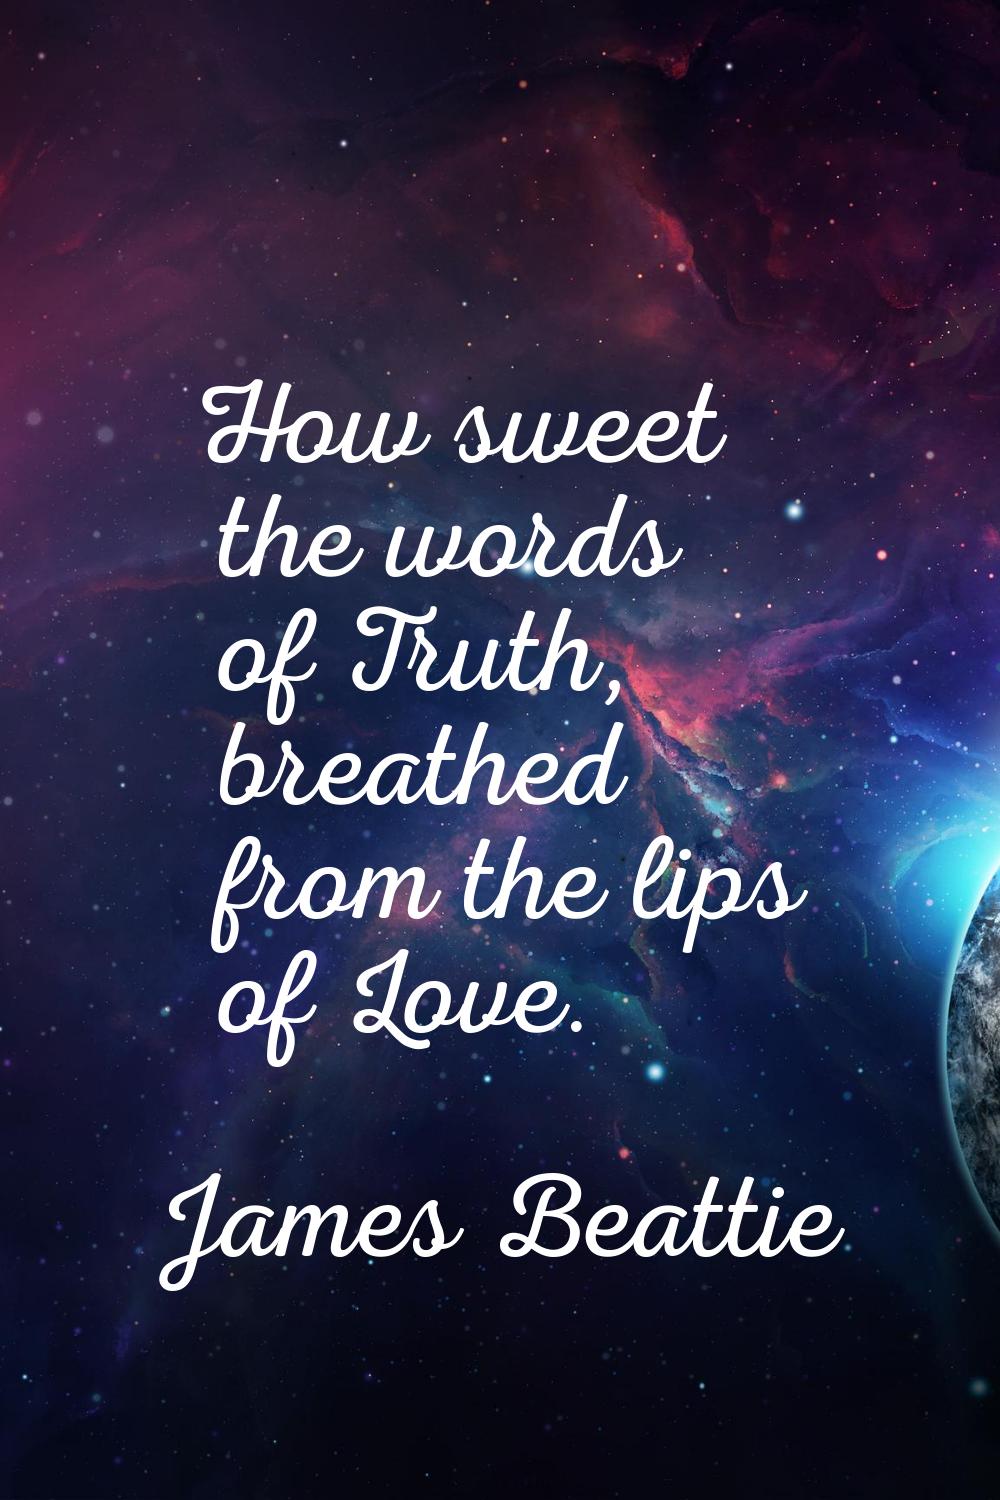 How sweet the words of Truth, breathed from the lips of Love.